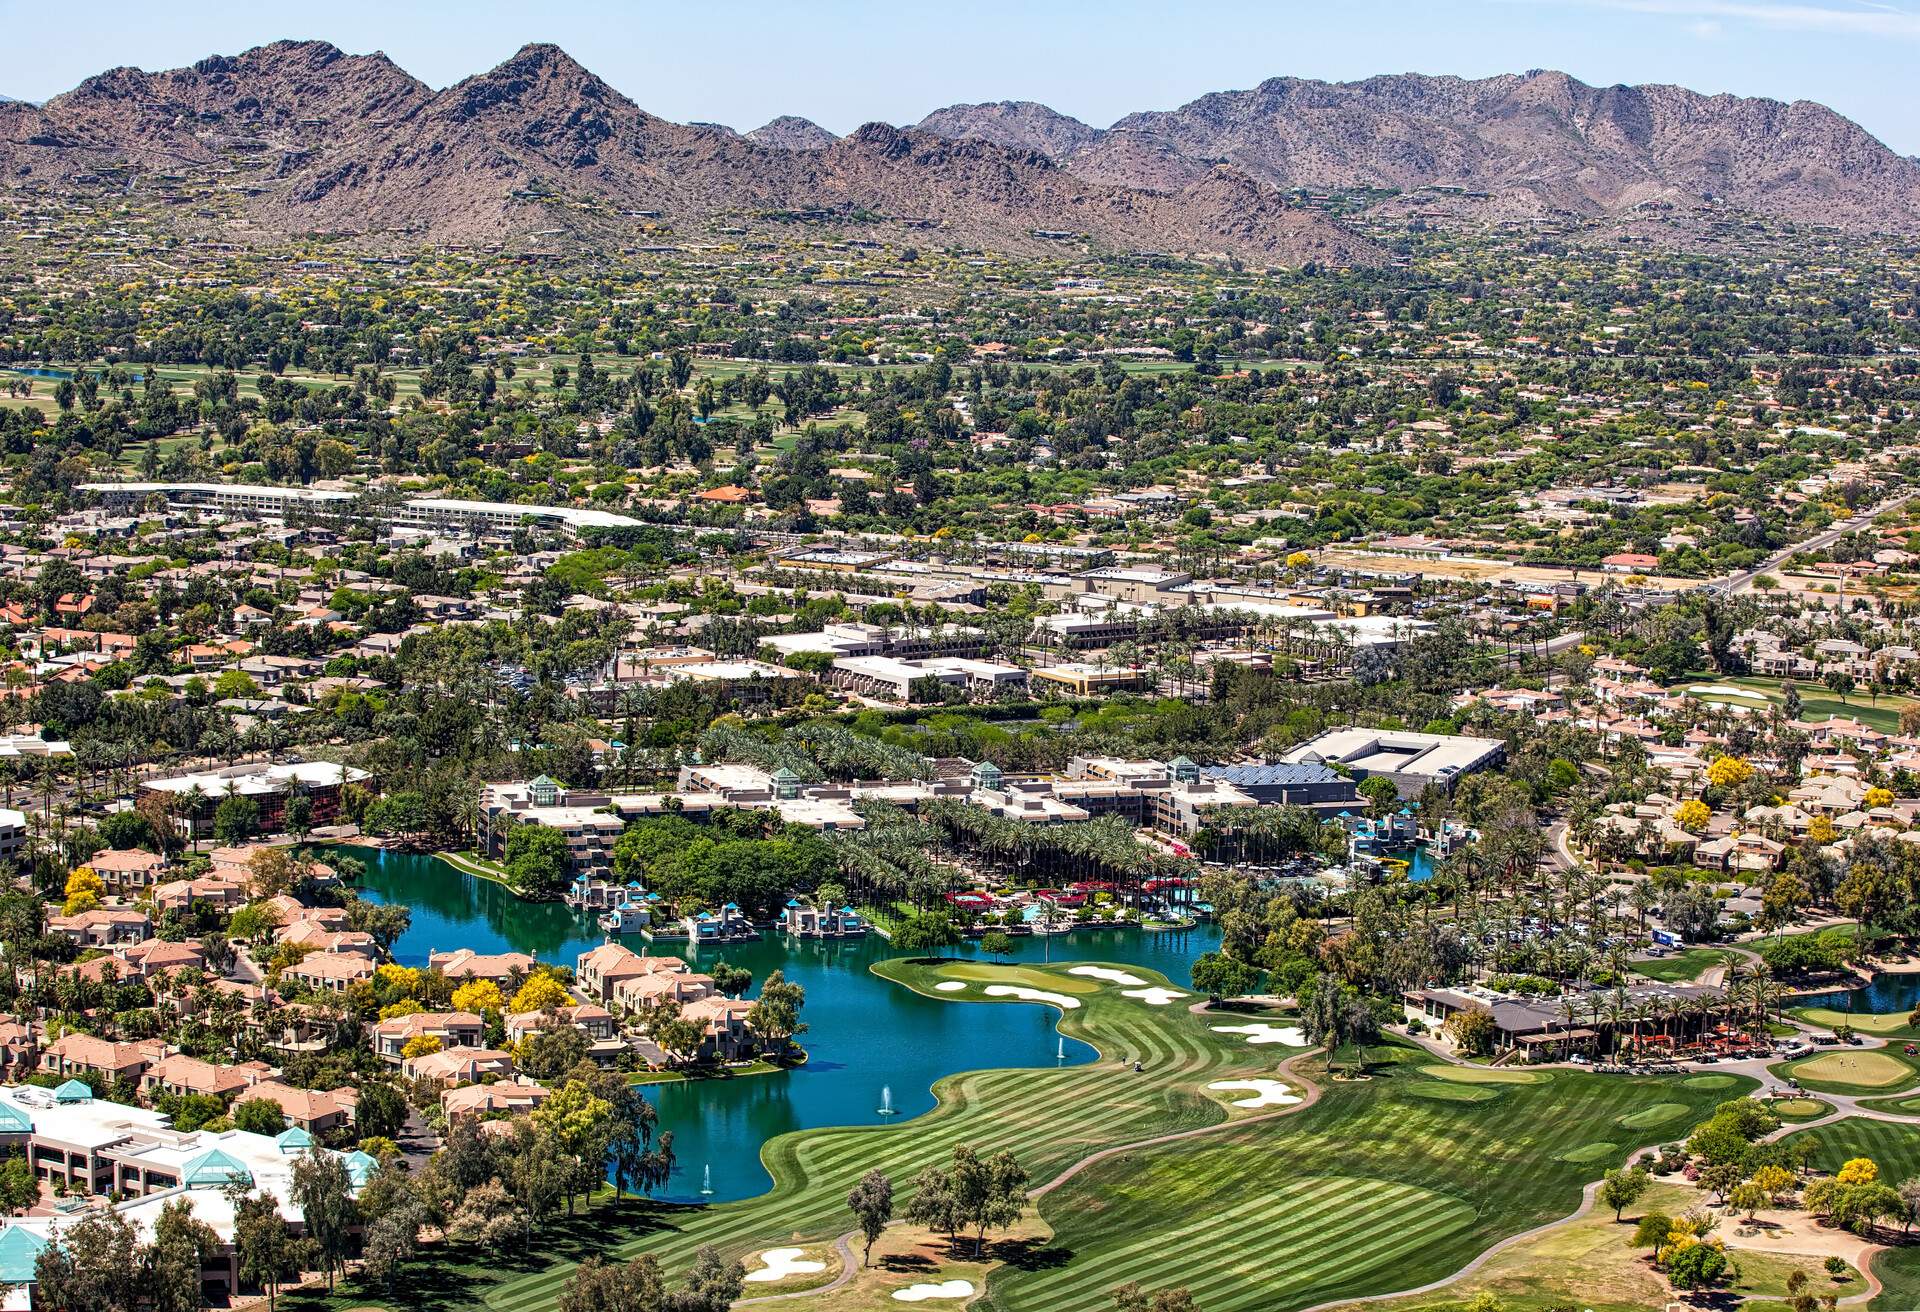 Over Scottsdale, Arizona looking to the southwest at golf courses, resorts, luxury homes and Mummy Mountain